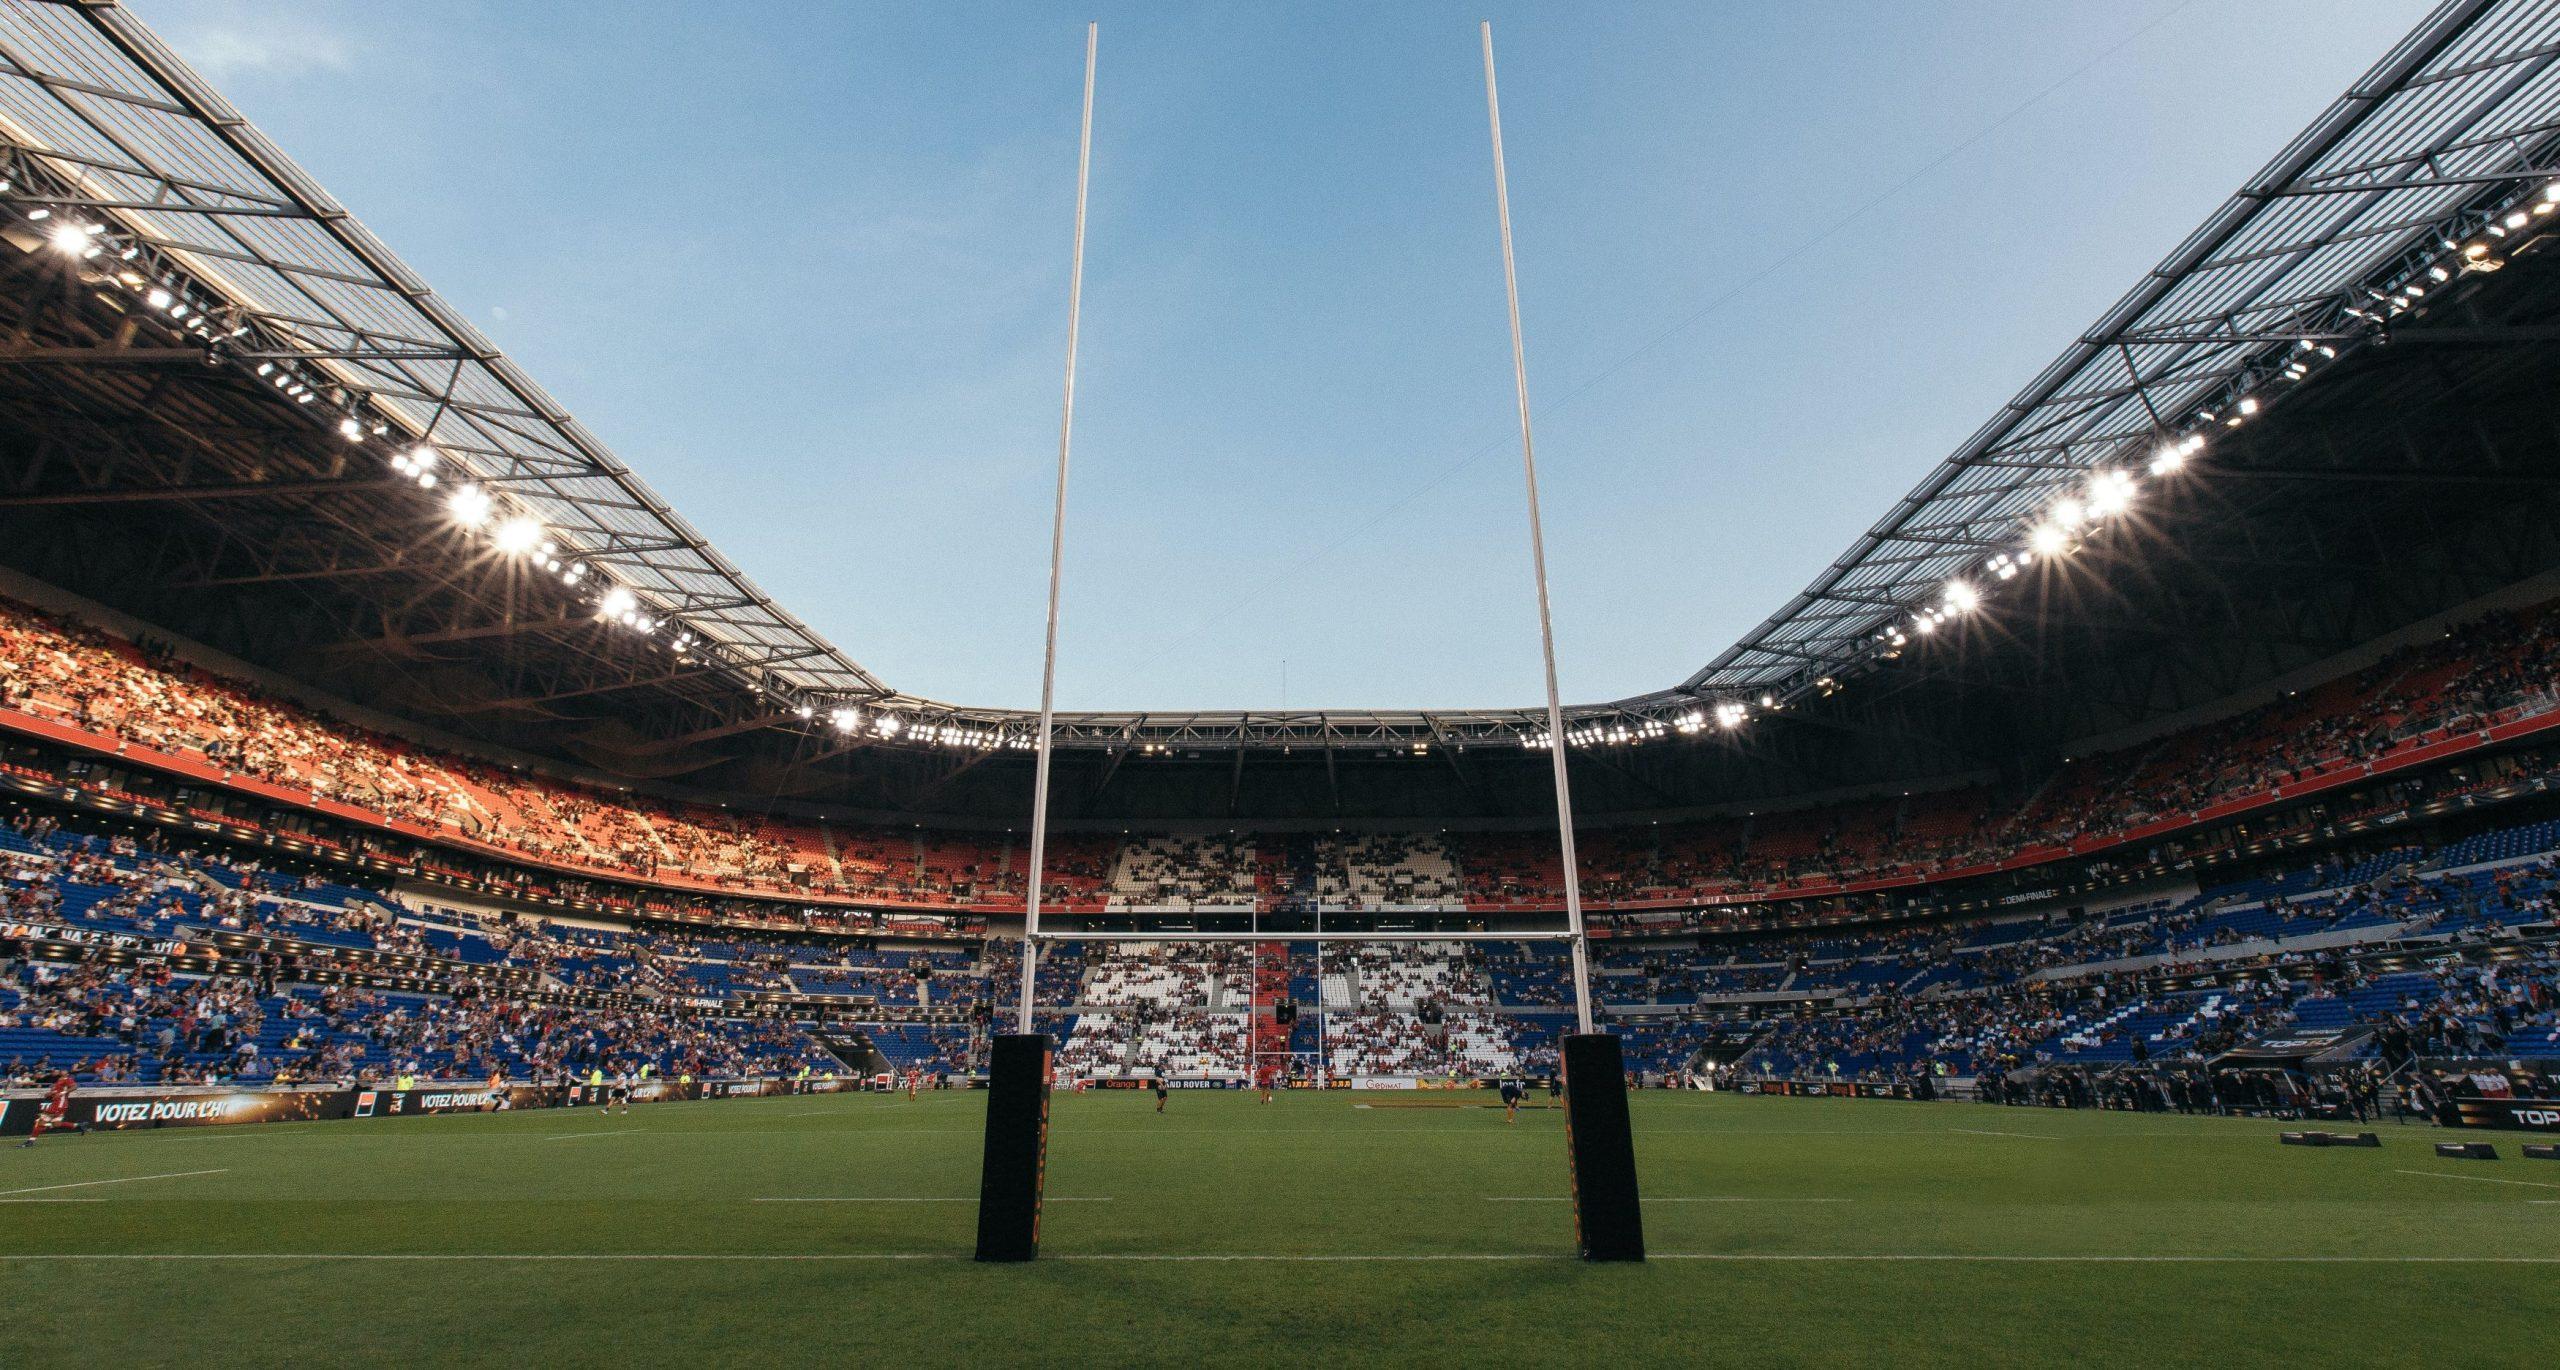 Rugby stadium in France.